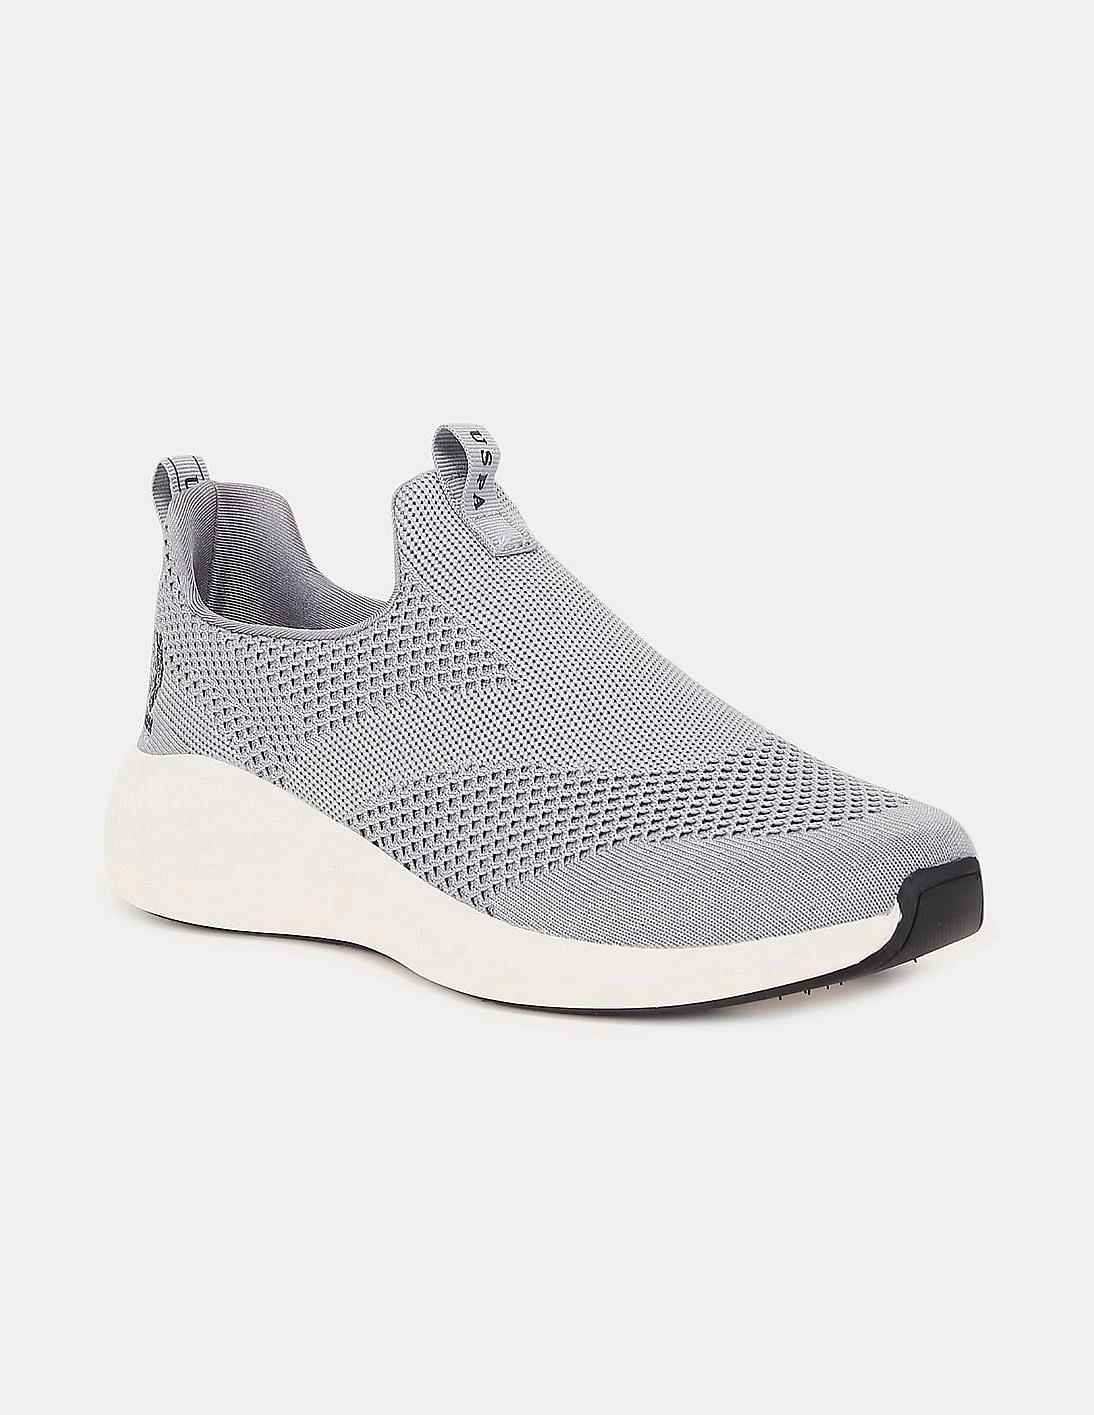 Buy U.S. Polo Assn. Mesh Knit Bronel 3.0 Slip On Sneakers - NNNOW.com